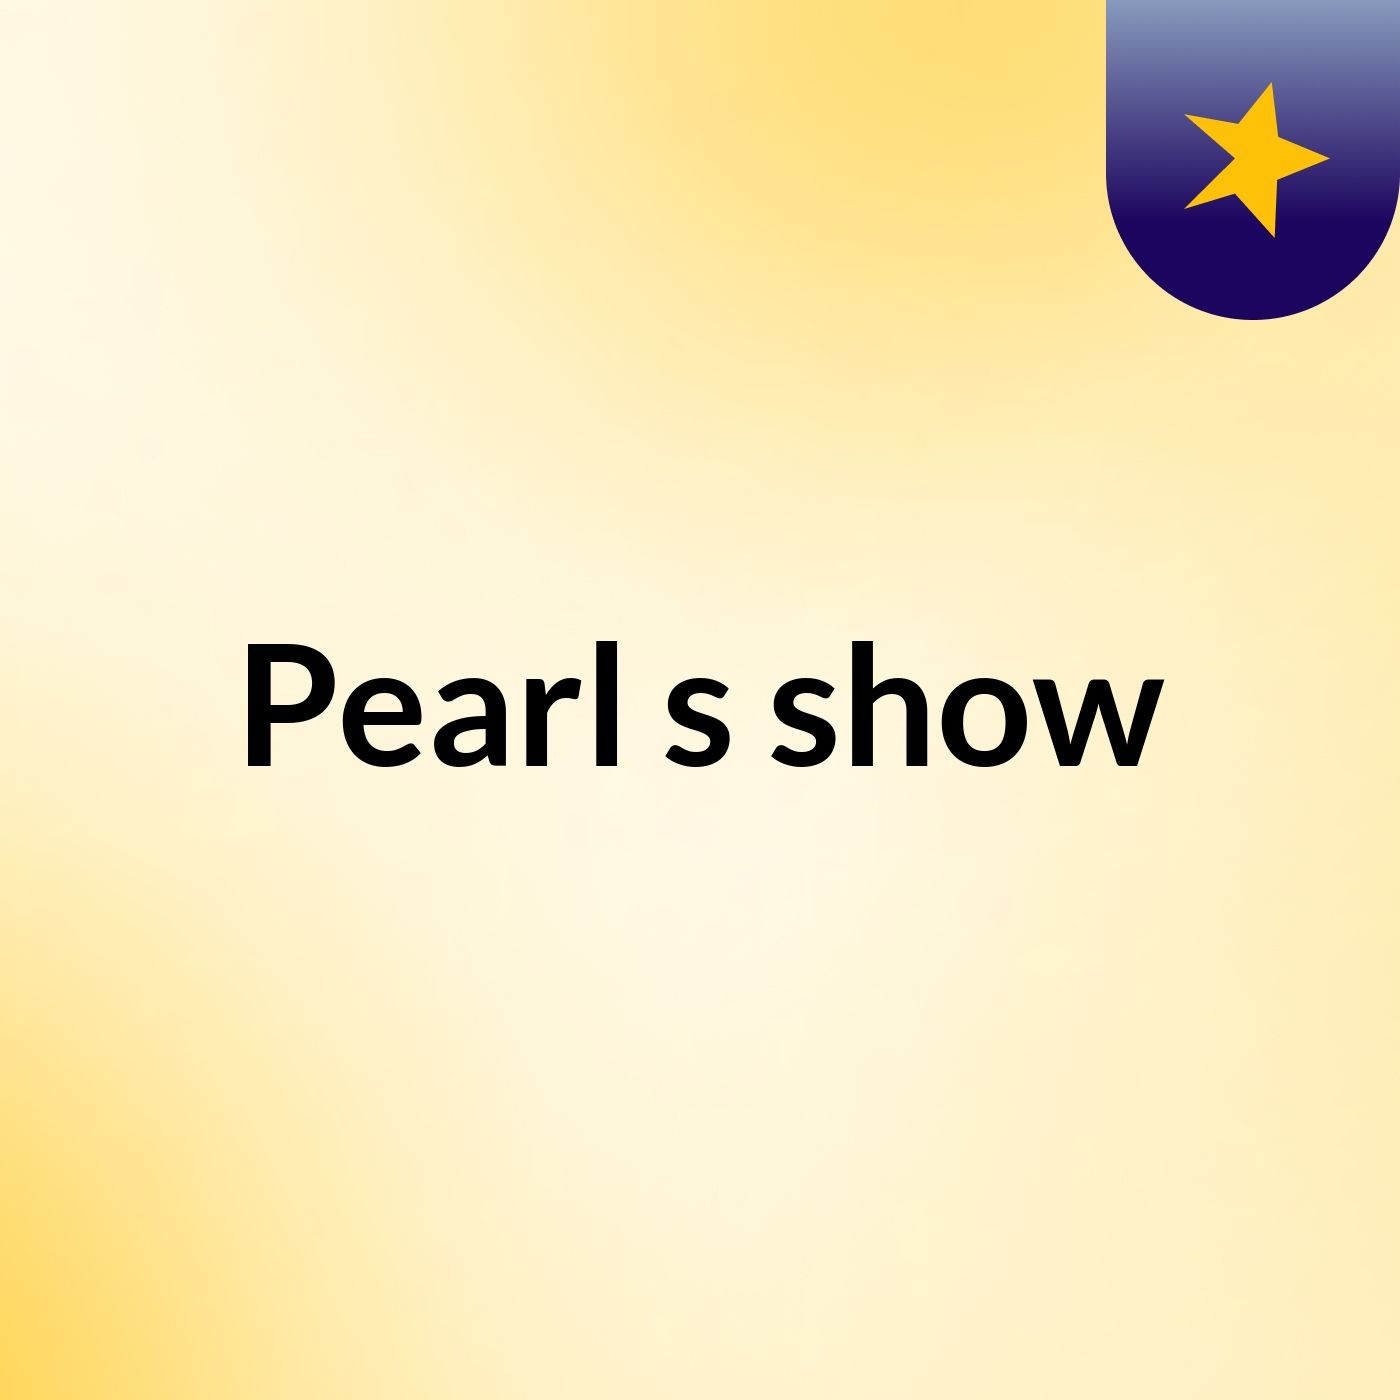 Pearl's show